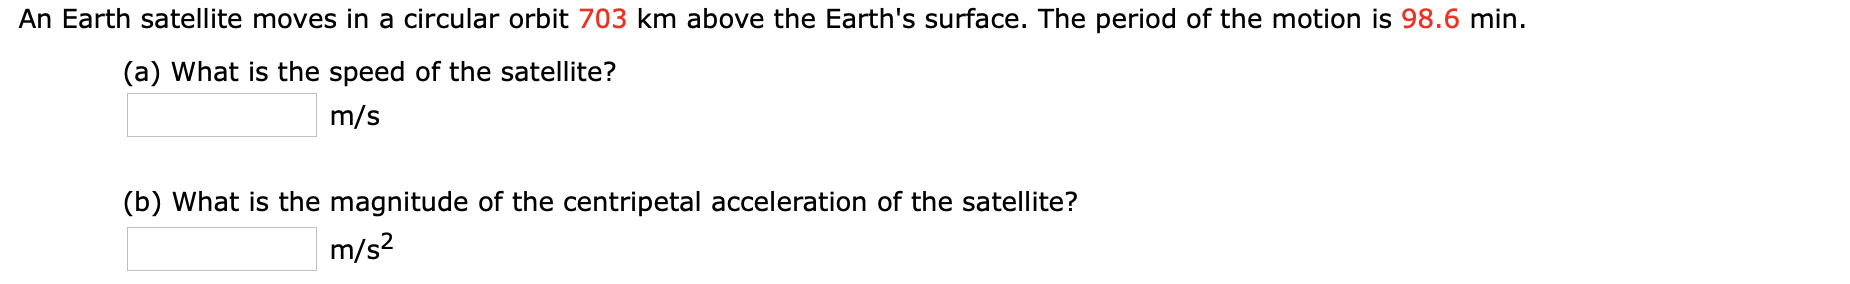 An Earth satellite moves in a circular orbit 703 km above the Earth's surface. The period of the motion is 98.6 min.
(a) What is the speed of the satellite?
m/s
(b) What is the magnitude of the centripetal acceleration of the satellite?
m/s2
